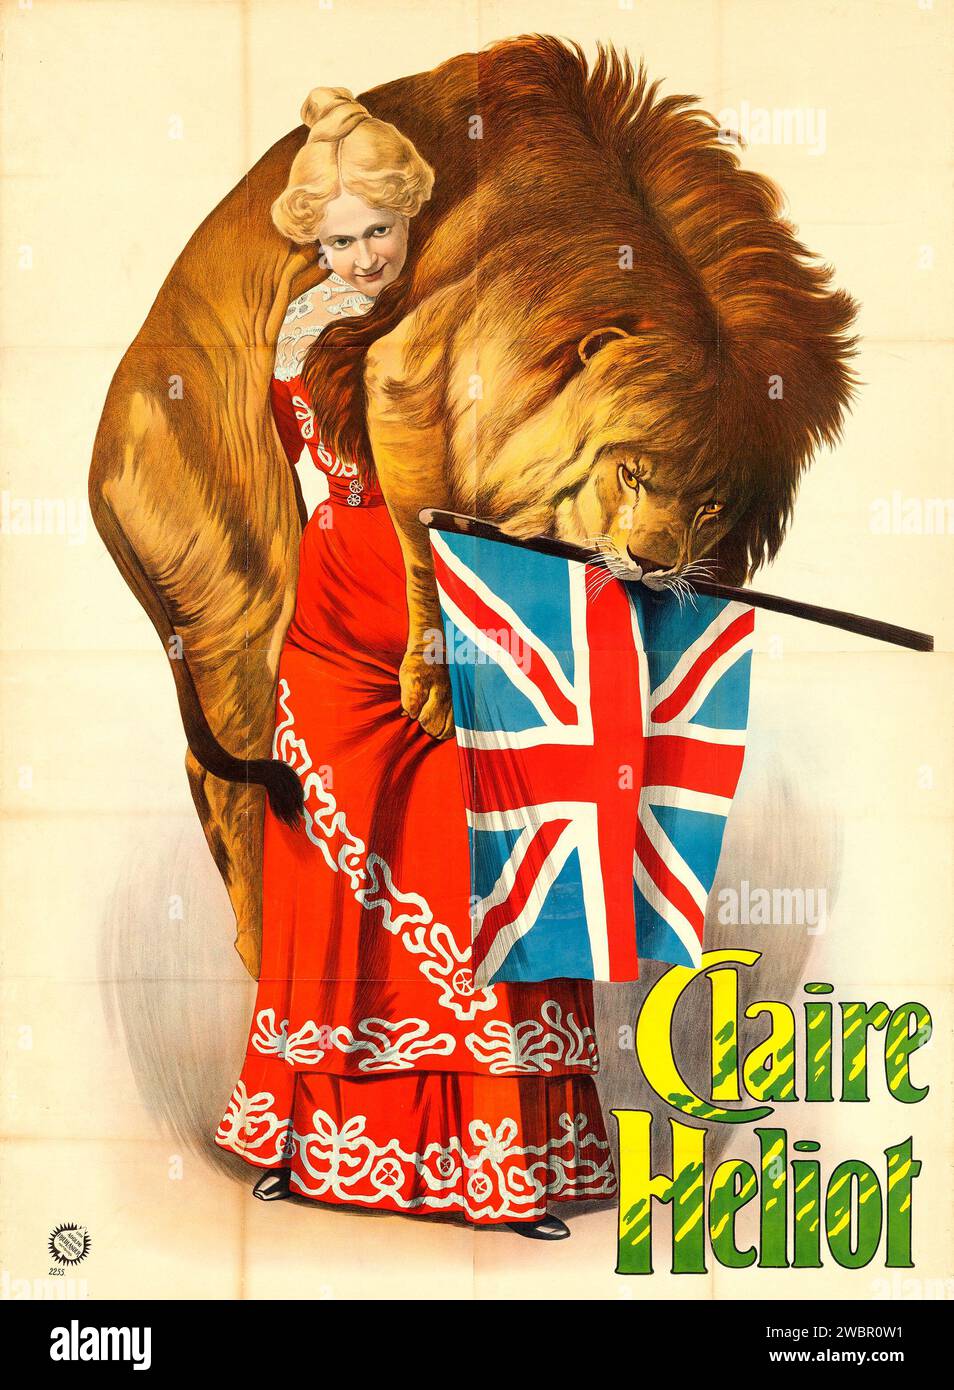 Claire Heliot Circus (Adolph Friedlander, c. 1900). Circus Poster feat a woman, a lion and the Union Jack flag Stock Photo